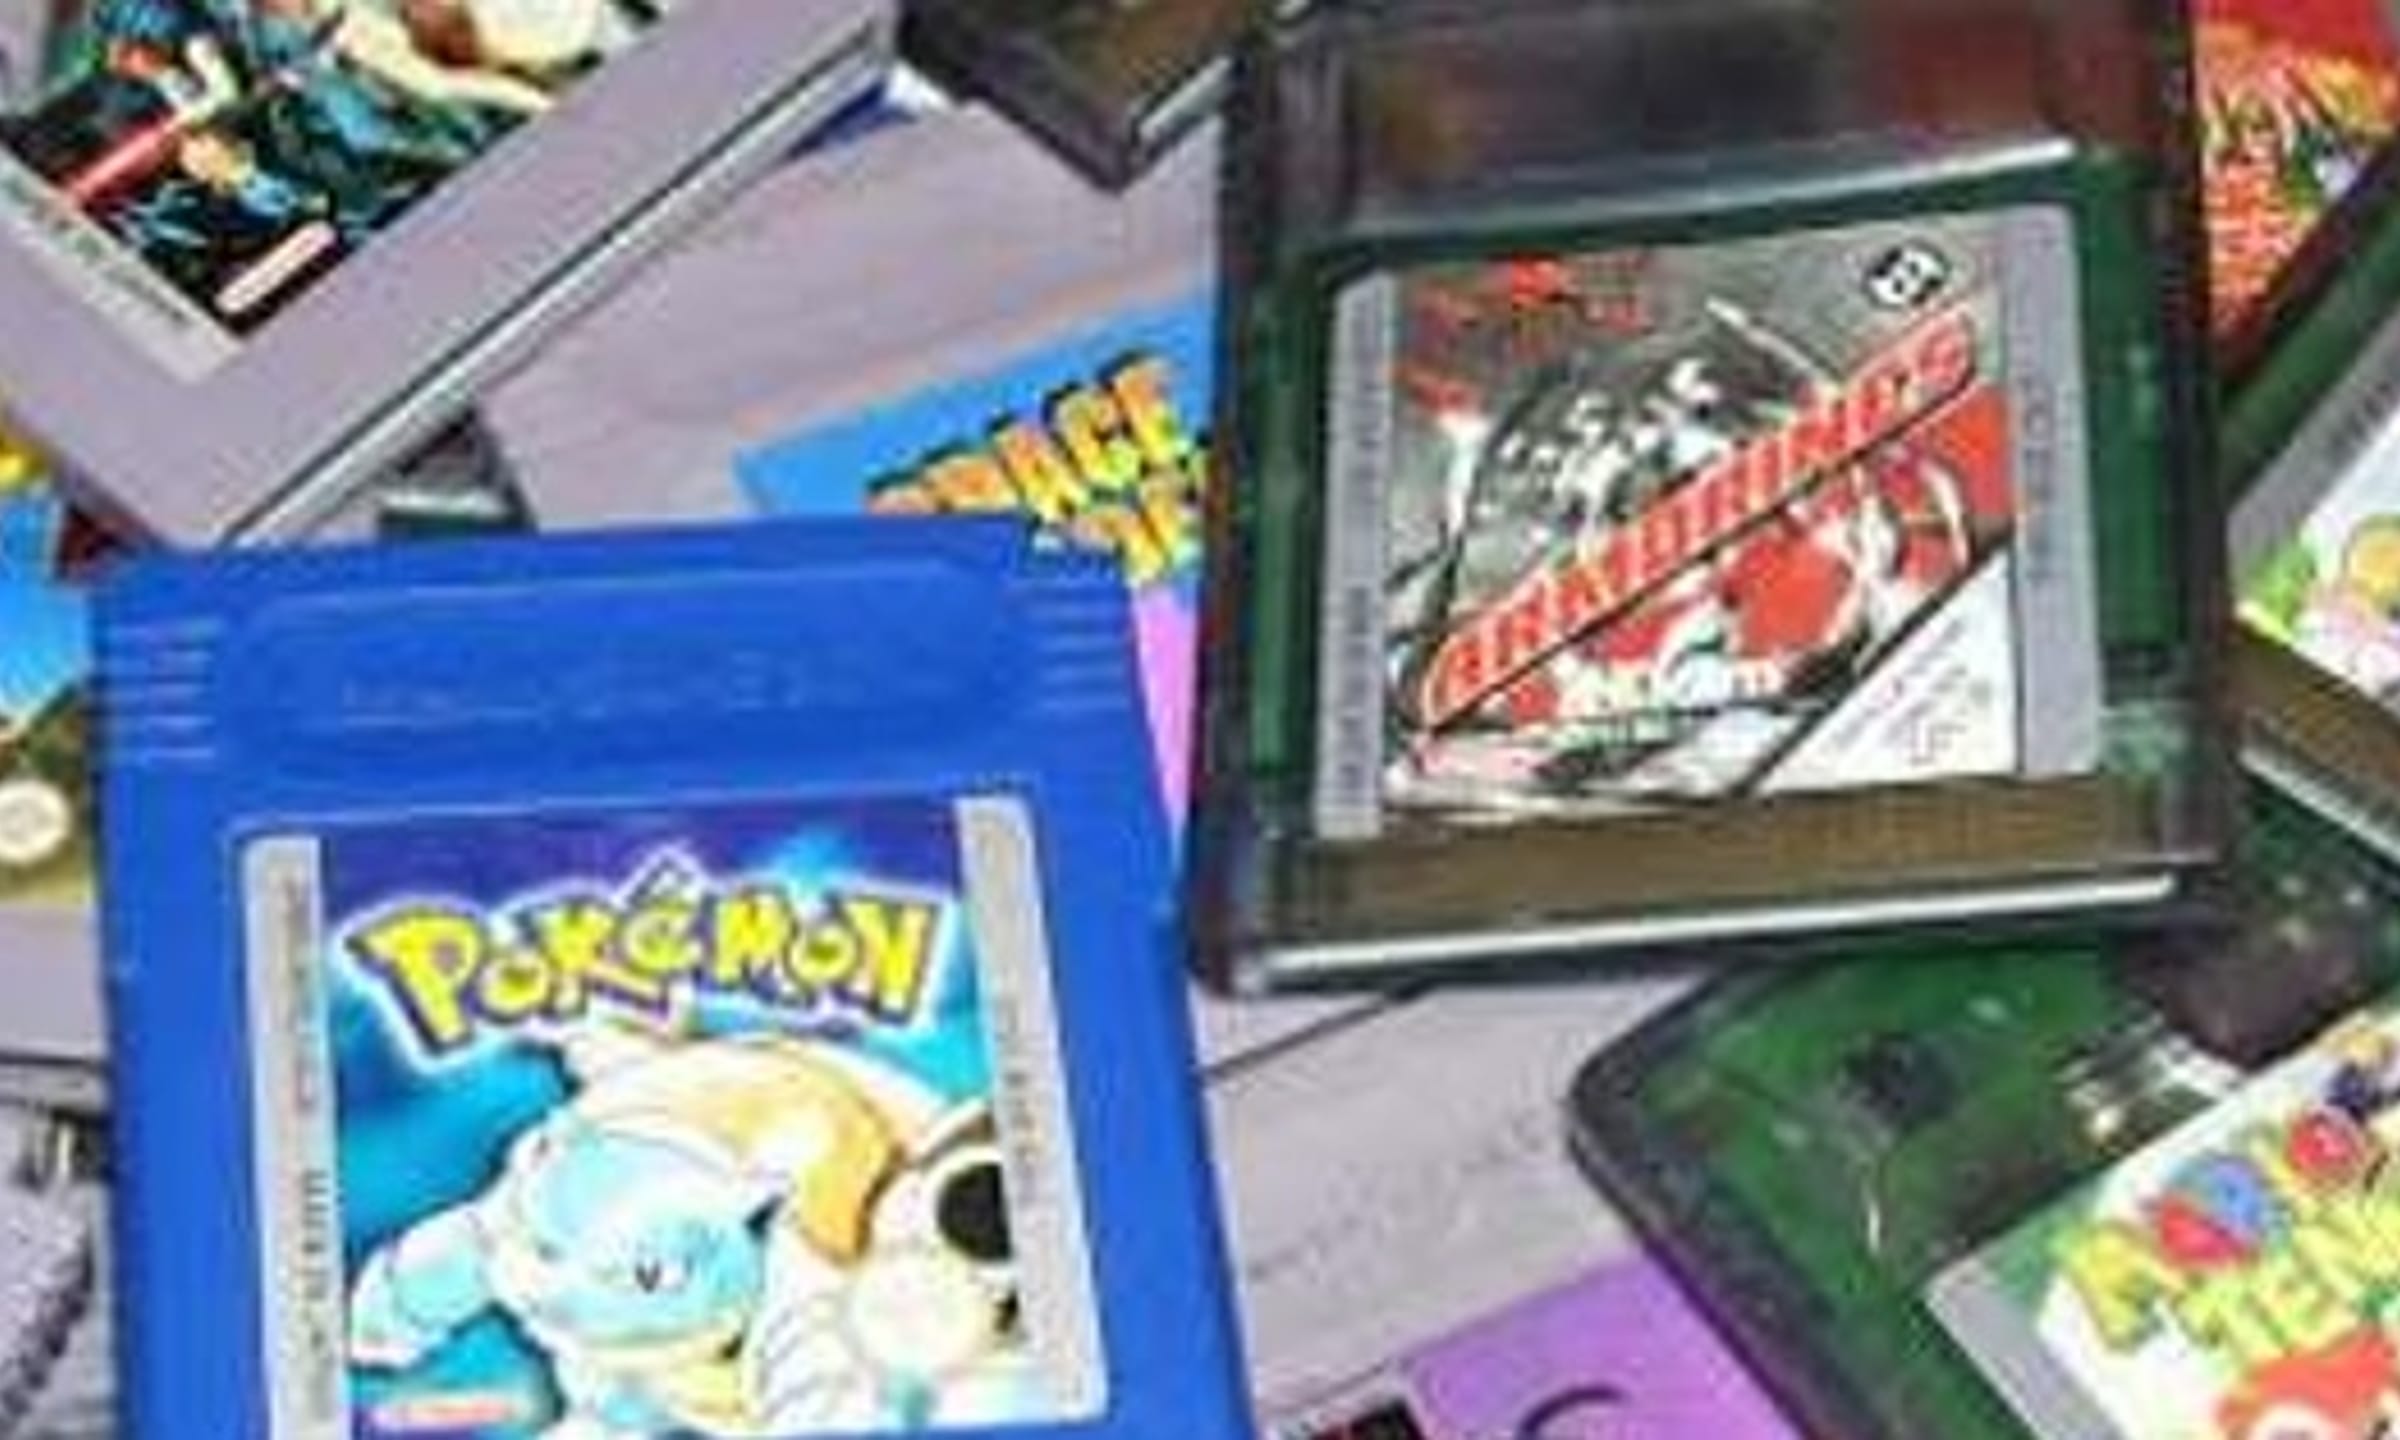 Game Boy Video Games: List of Game Boy Console Games